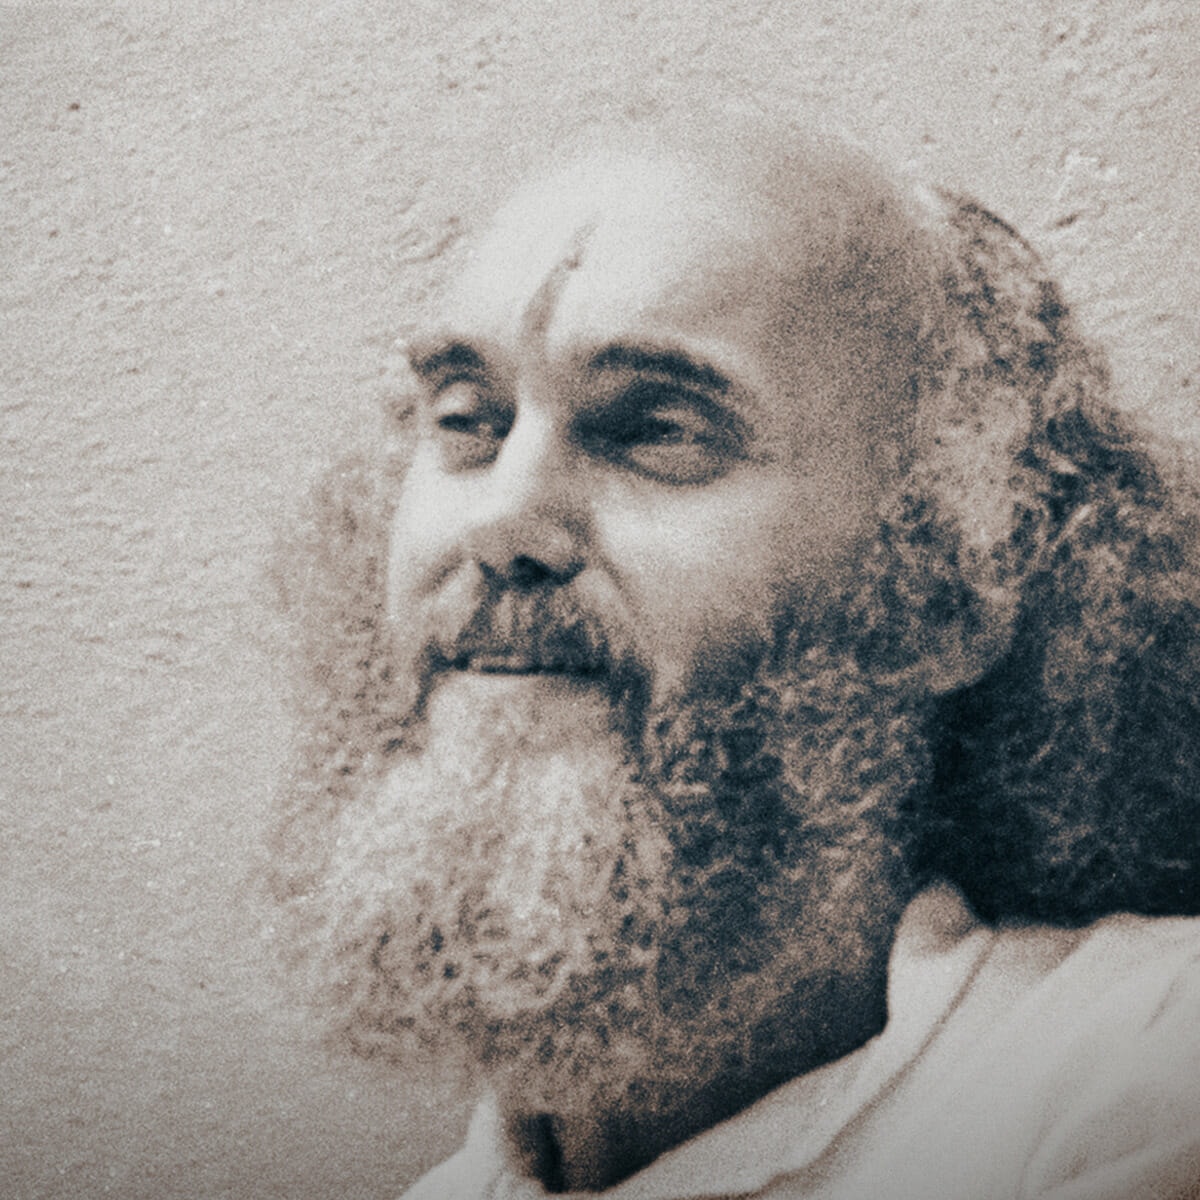 Raghu Markus returns to lead us into the new year with a talk from Ram Dass which reminds us of our interconnectedness and the need to keep our hearts turned toward the spirit of generosity.